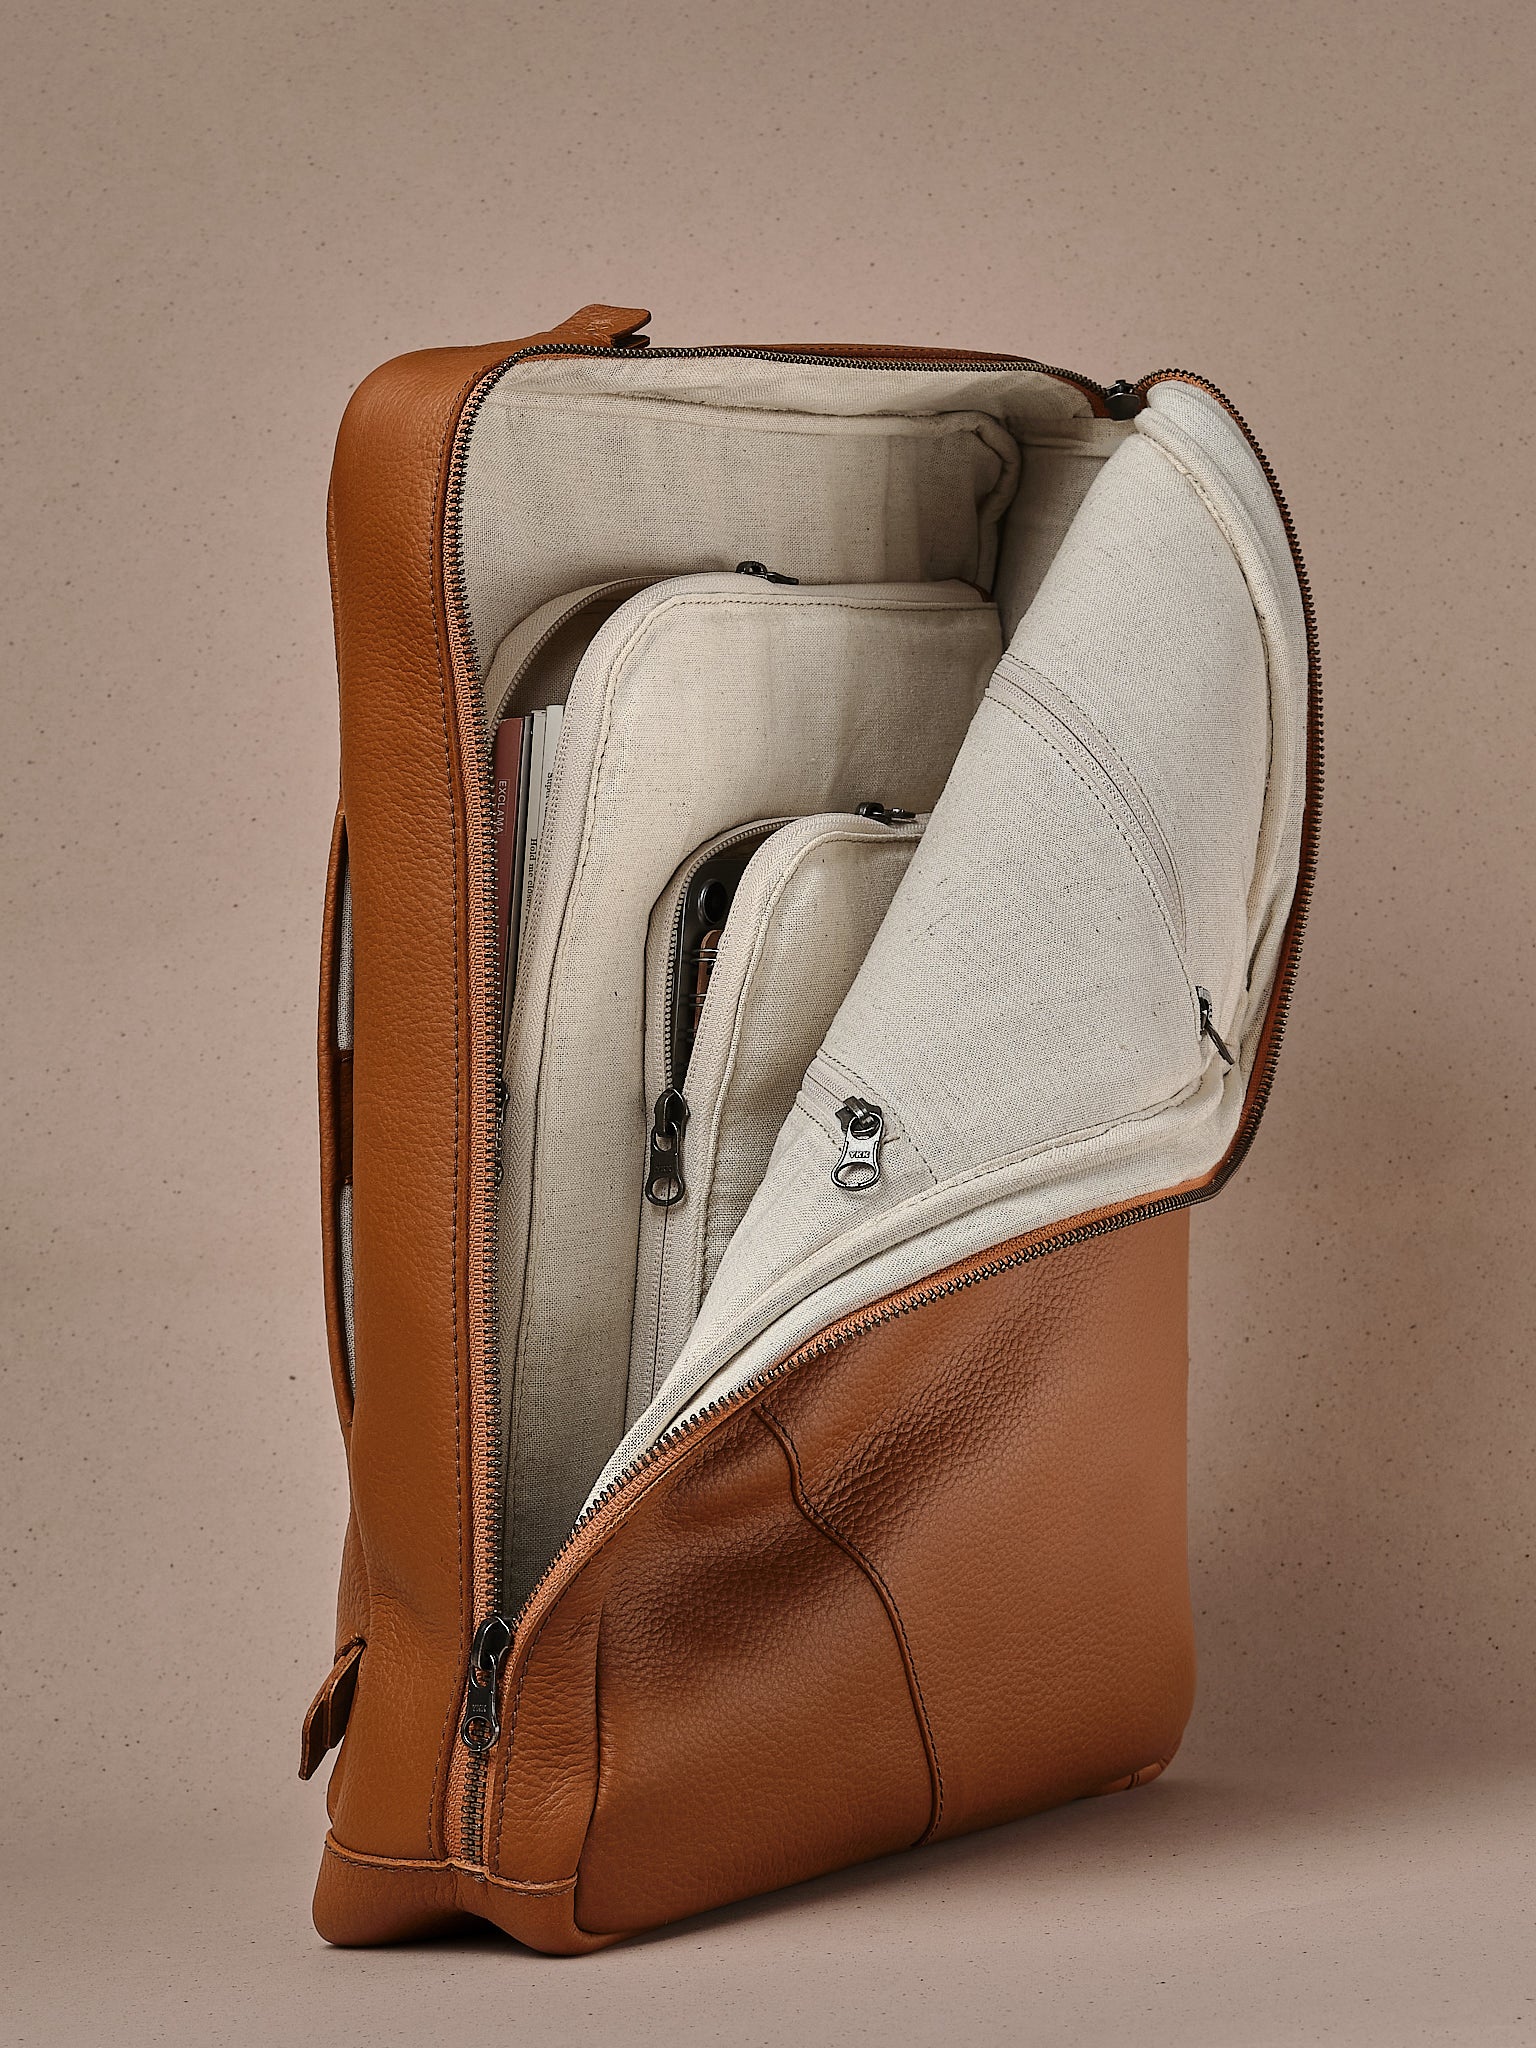 Laptop and tablet compartments. Best Backpack for Work. Backpack Briefcase Tan by Capra Leather